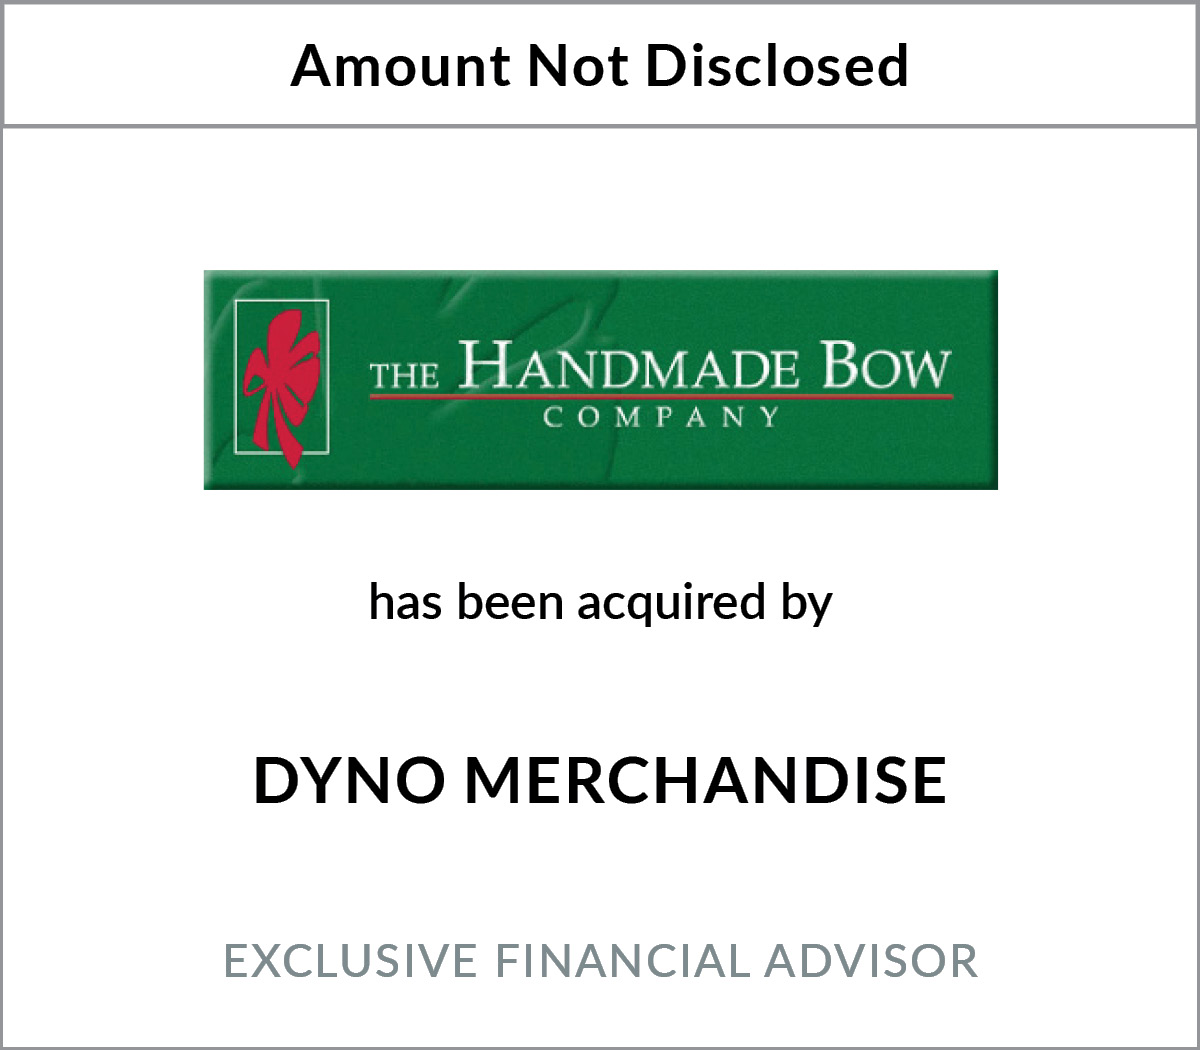 Dyno Merchandise Completes Acquisition of The Handmade Bow Company